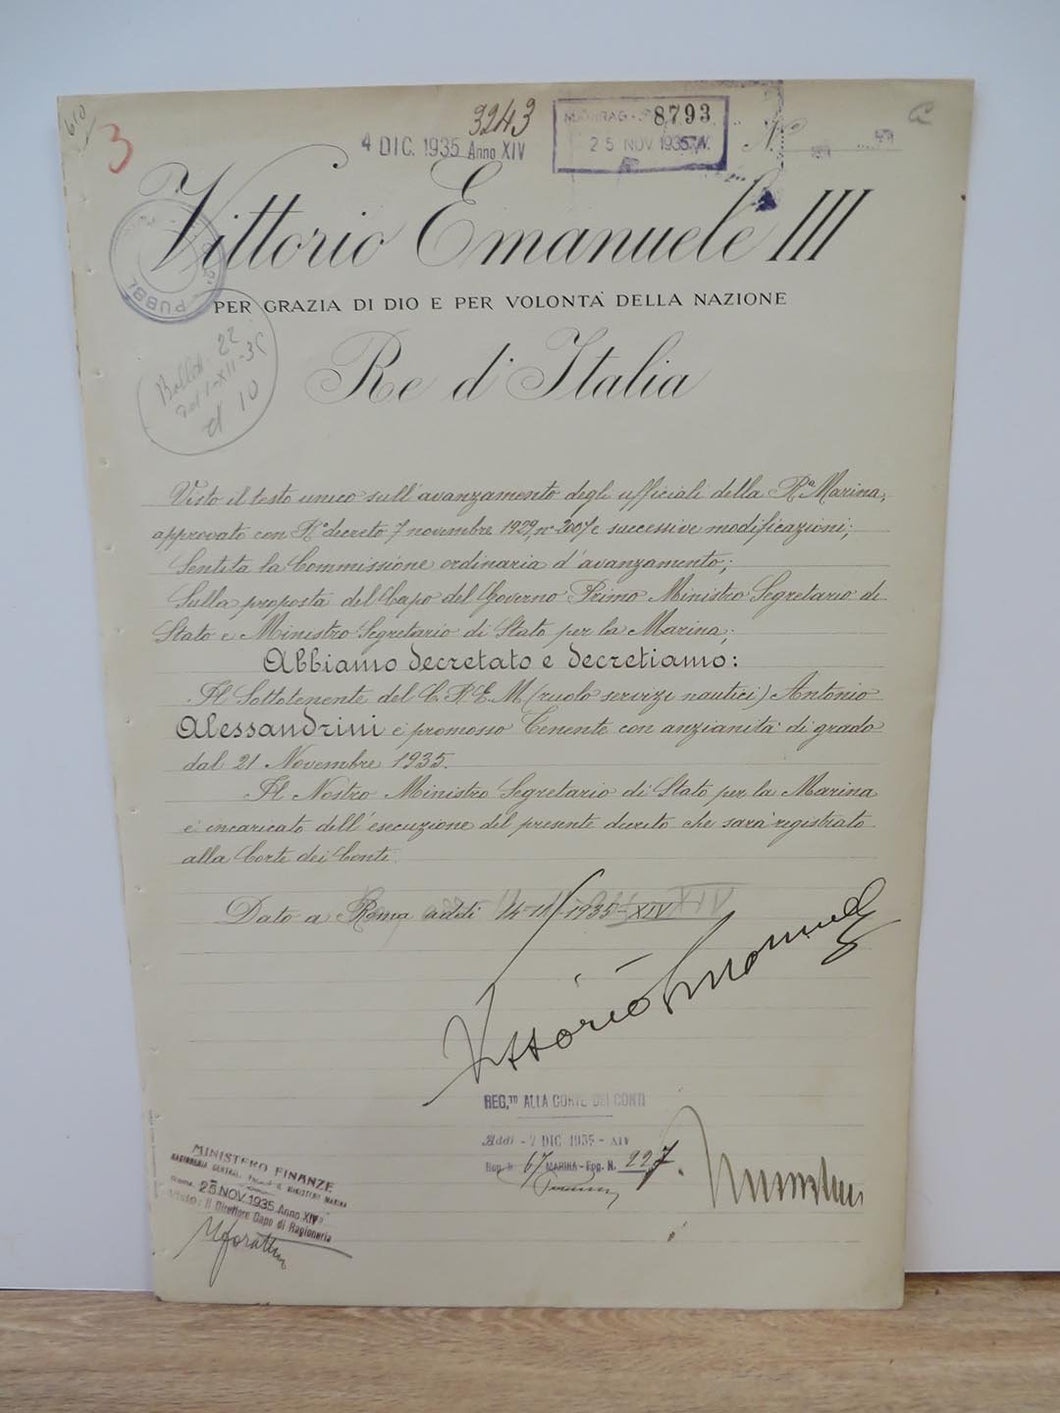 Military appointment signed by Benito Mussolini and King Victor Emmanuel III of Italy